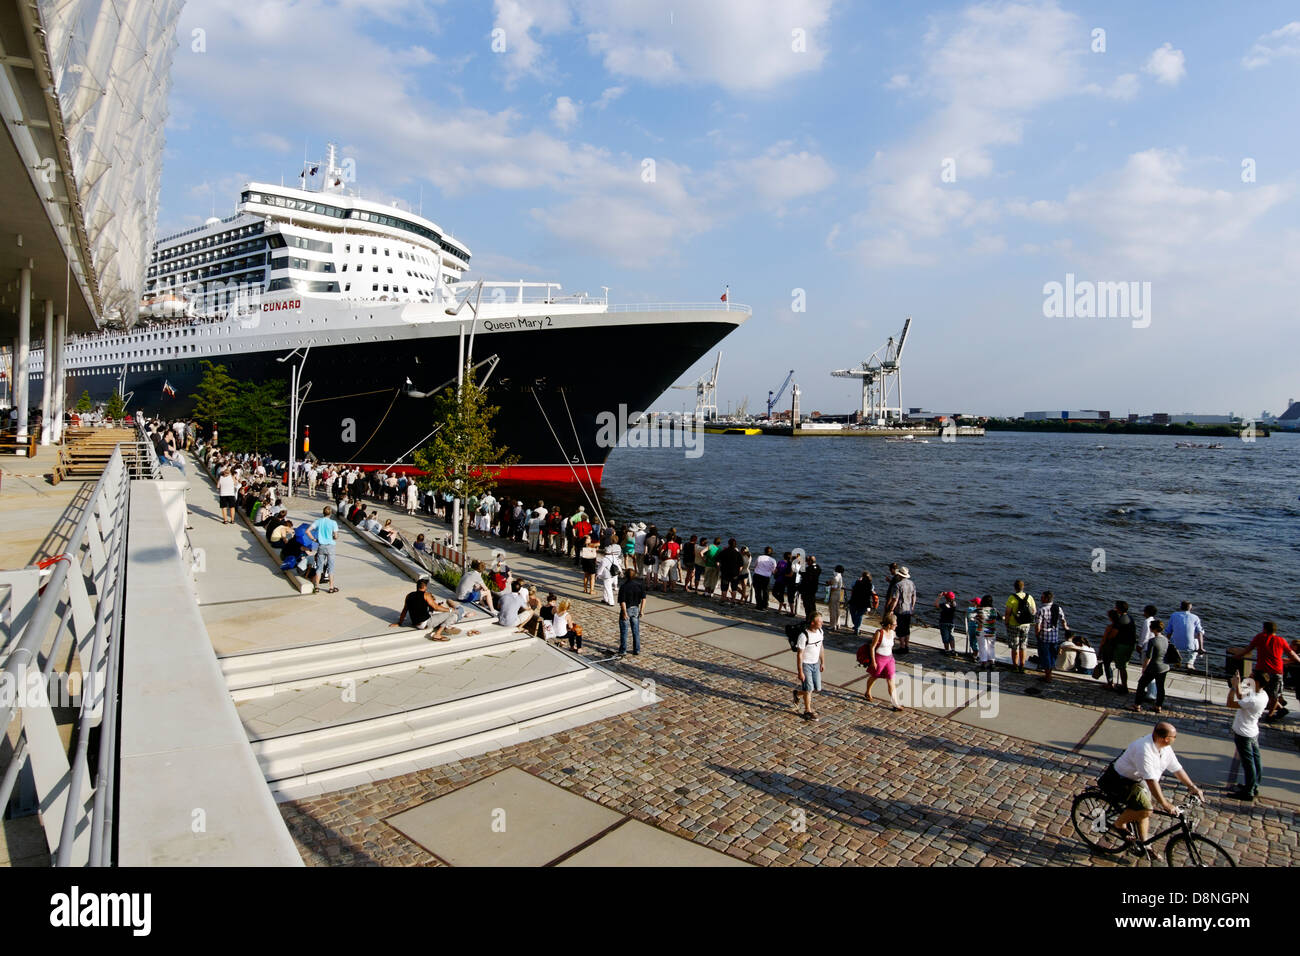 Cruise ship Queen Mary 2 at the Cruise Center Hamburg, Germany, Europe Stock Photo